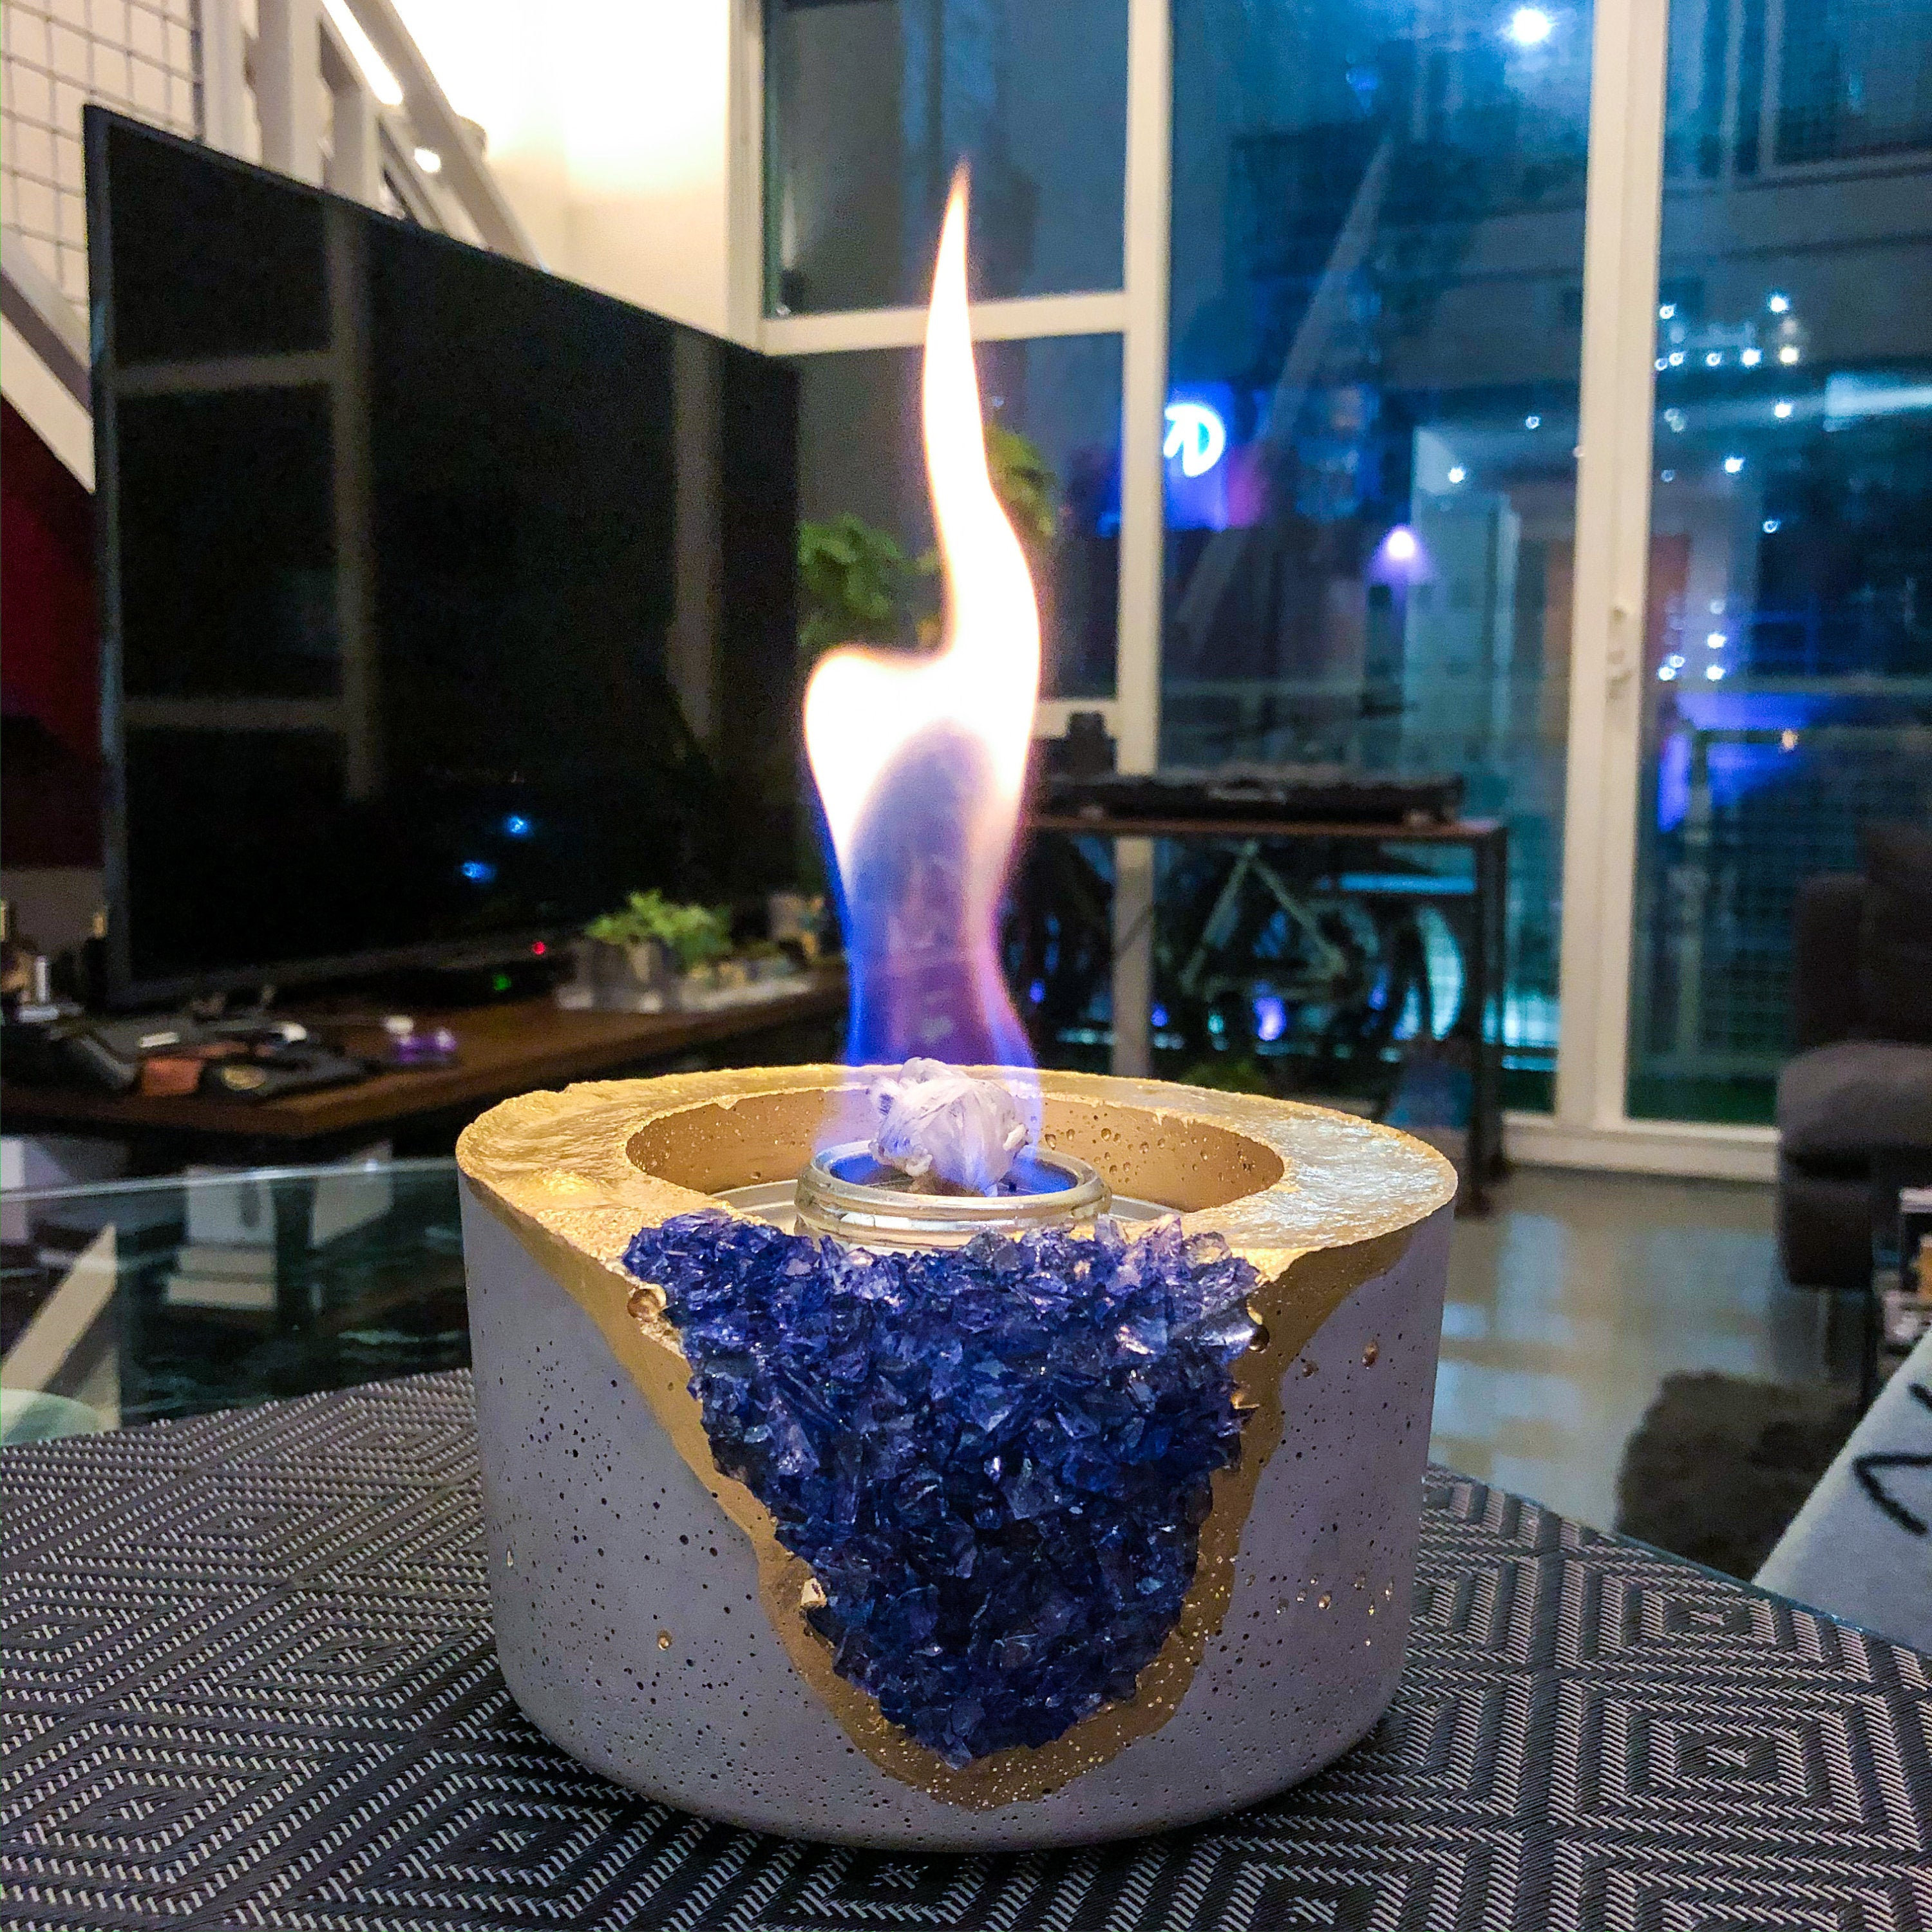 Tabletop Fireplace with Amethyst Indoor Firepit Rubbing Alcohol Bio Ethanol Mini Fire Bowl Pit Outdoor Decor Portable Table Top Small Chiminea Meditation Bowl Geode Candle Holder Boho Concrete Pot